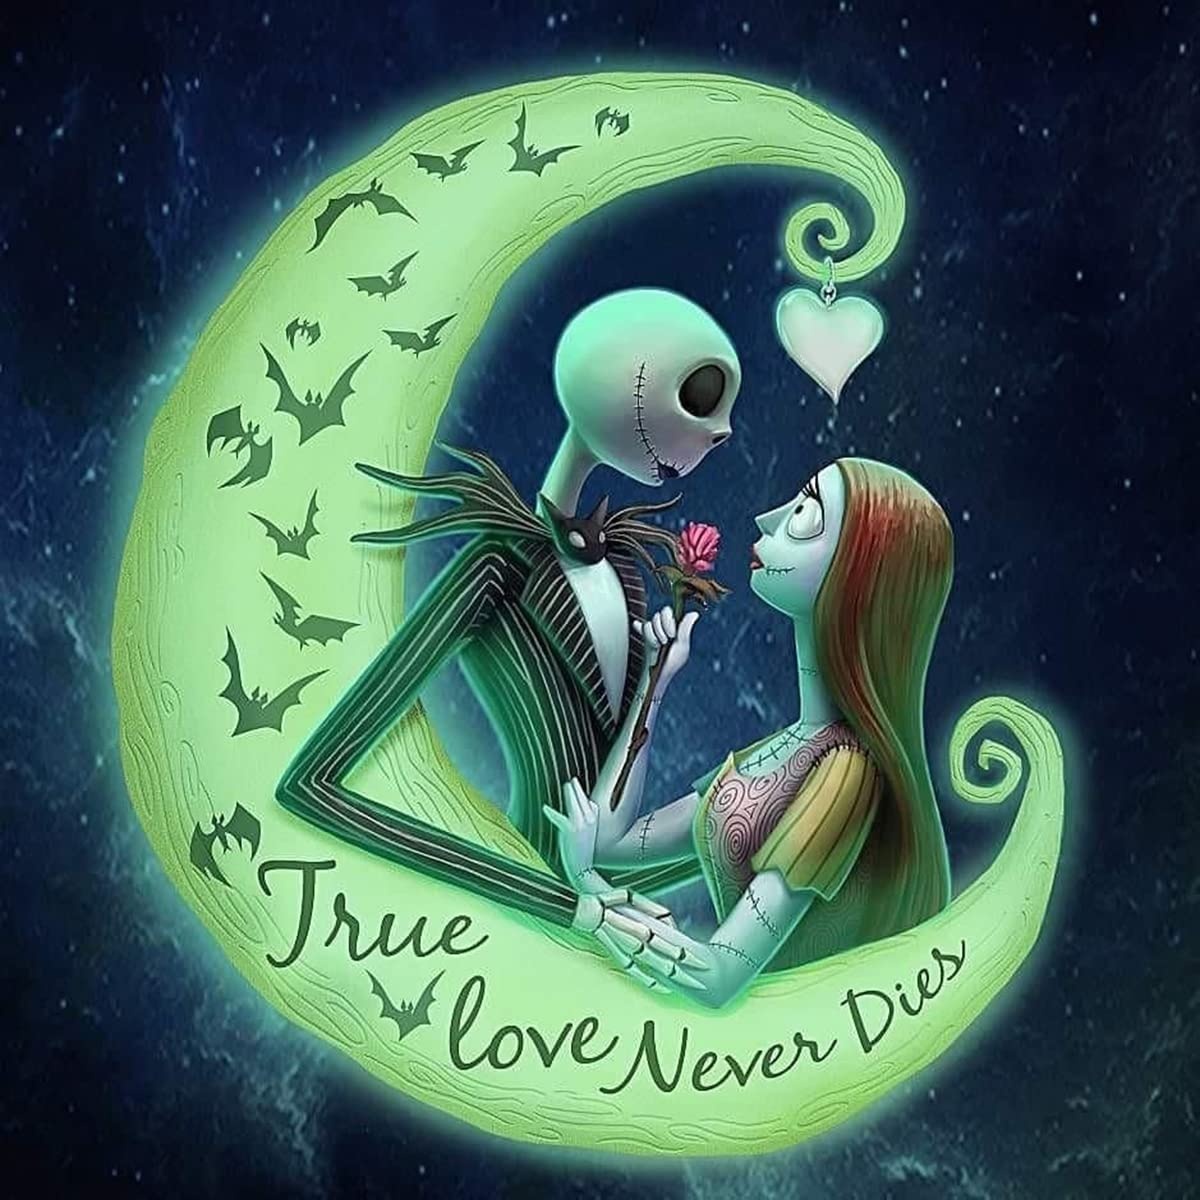 ViVijooy 5D DIY Full Drill Diamond Painting by Number Kits for Adluts, The Nightmare Before Christmas Halloween Jack and Sally with Mond, Diamond Art Kits Craft Home Decor, 35 x 35 cm